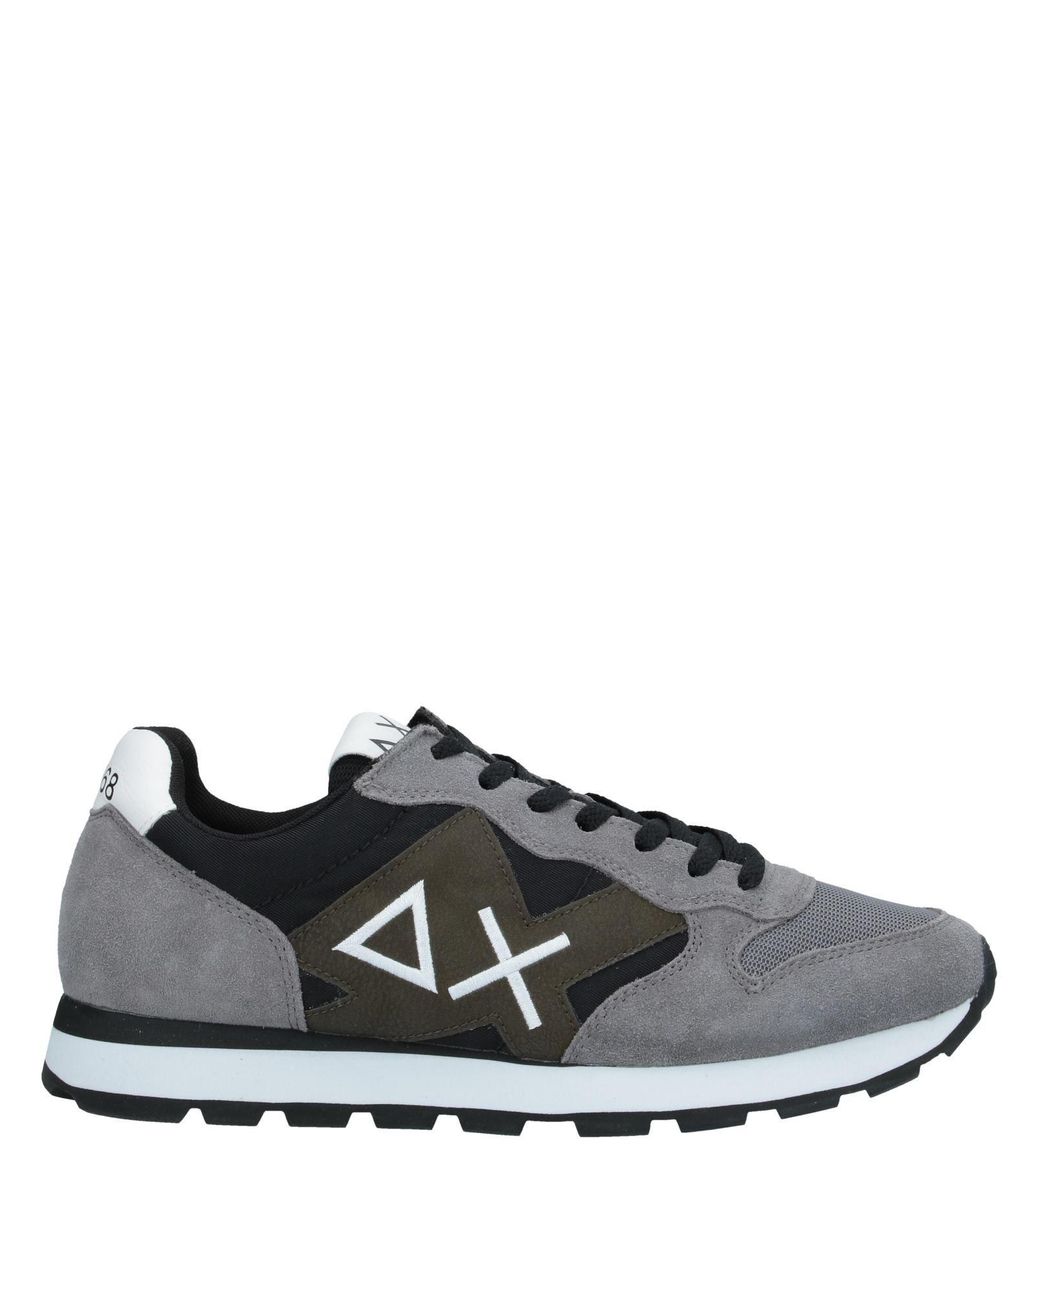 Sun 68 Leather Low-tops & Sneakers in Grey (Gray) for Men - Lyst